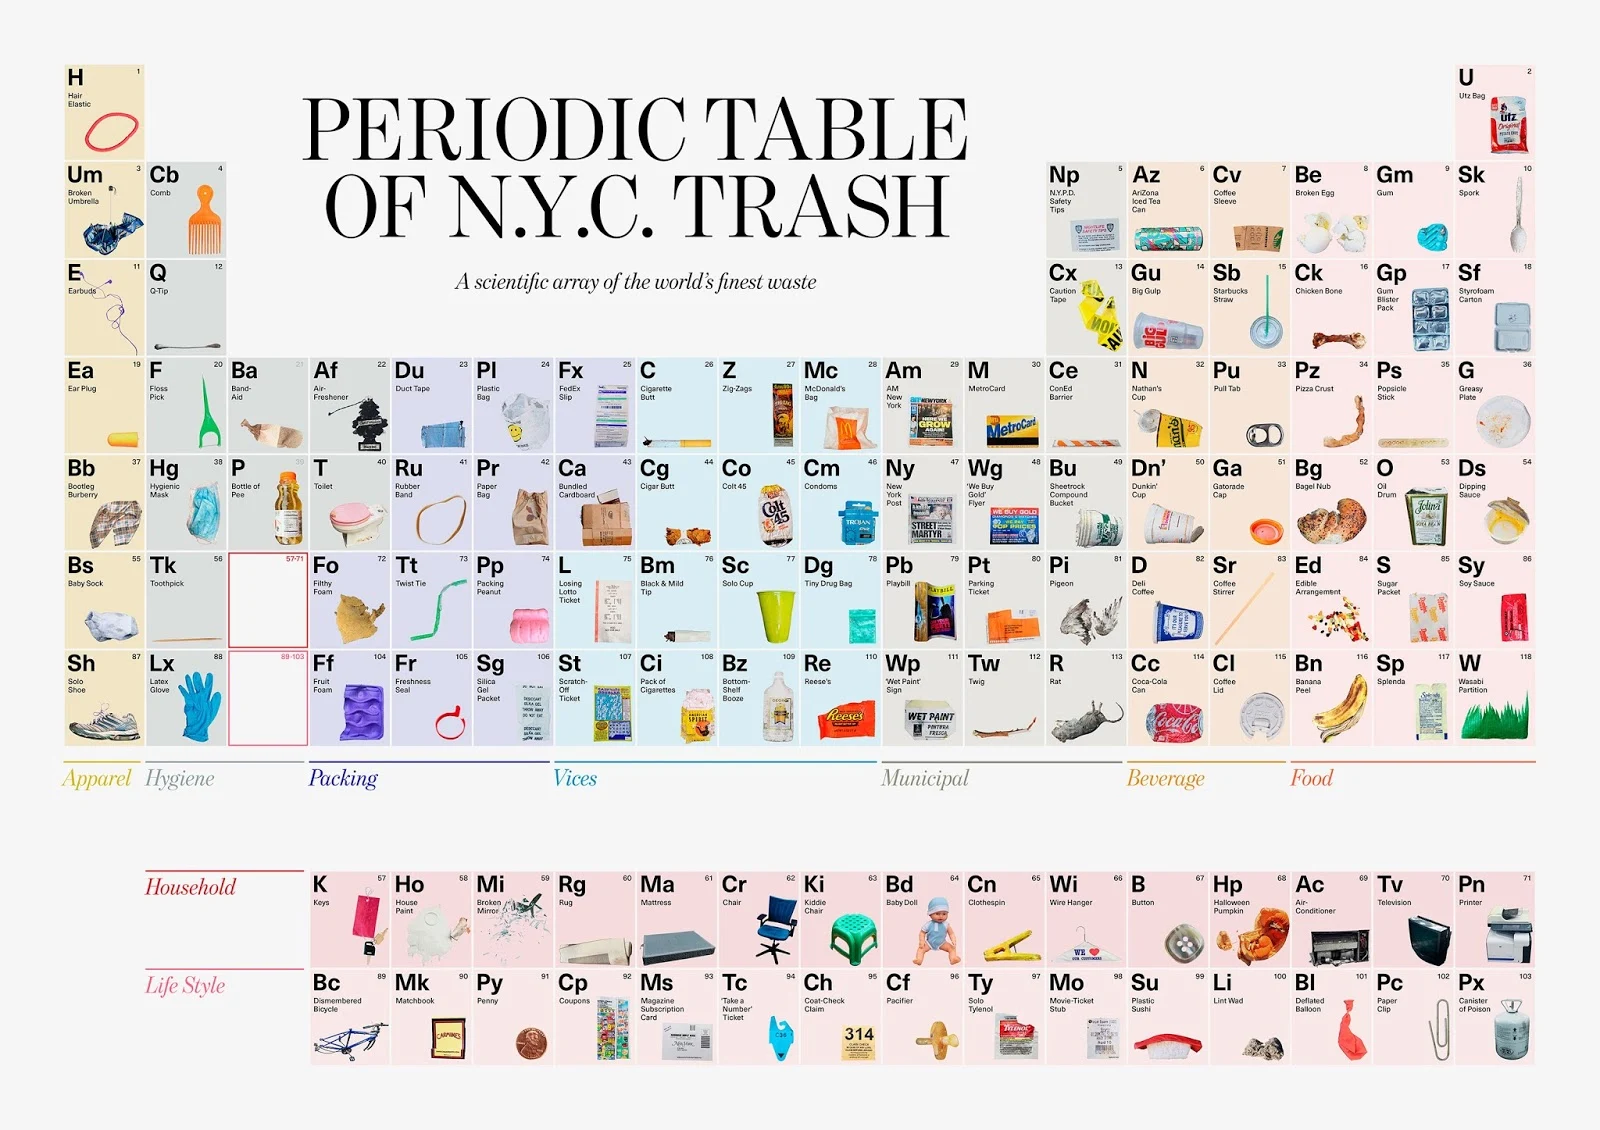 Periodic table of New York City trash: a scientific array of the world's finest waste